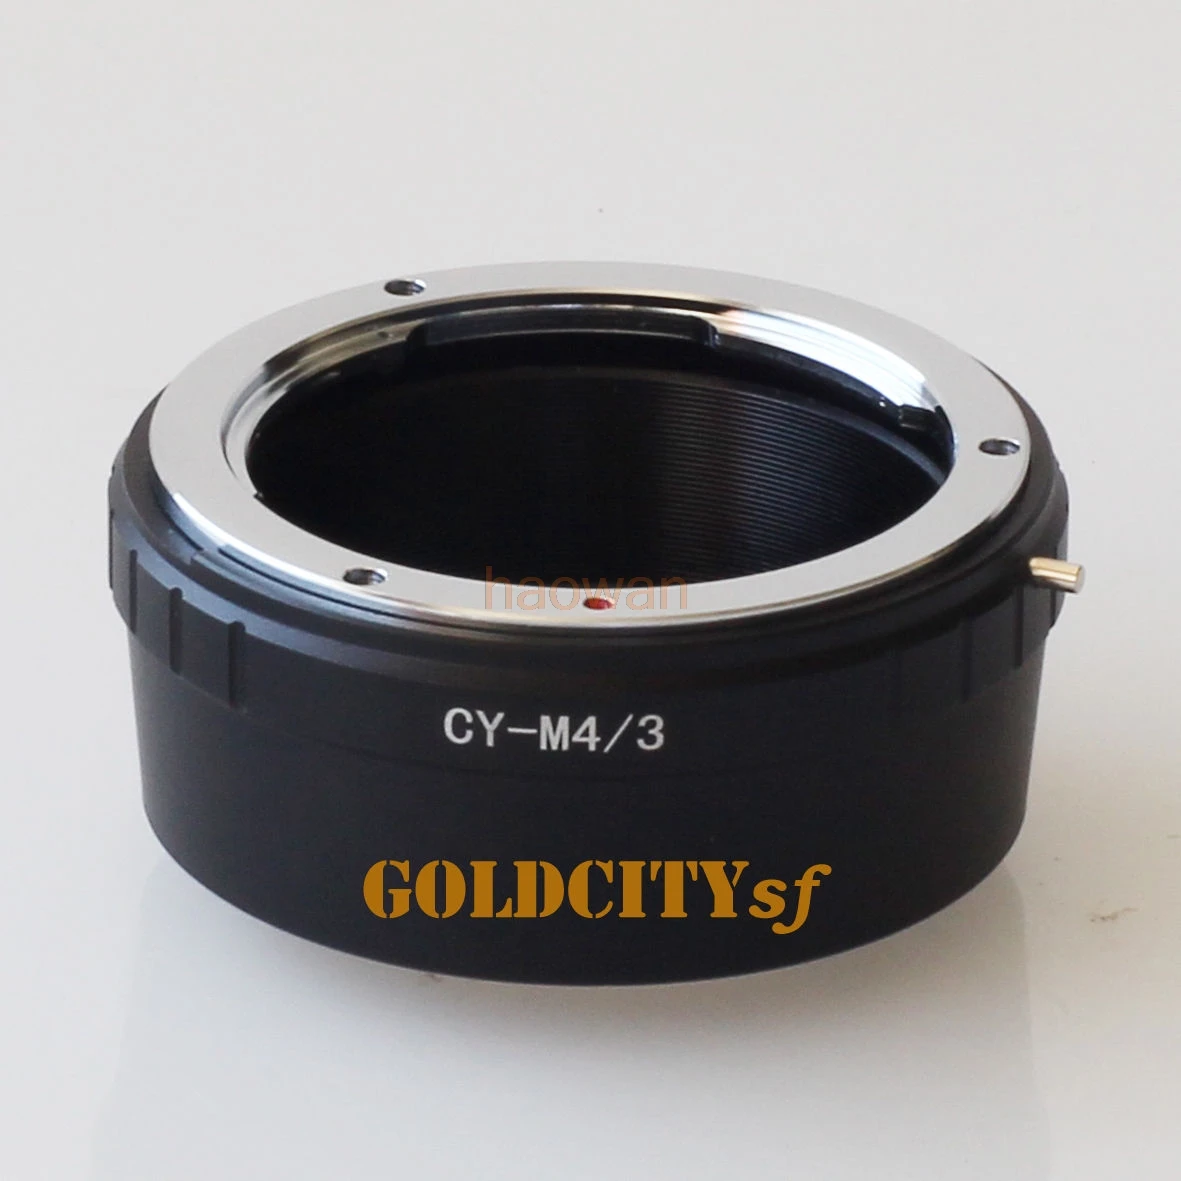 

Contax C/Y CY Lens to Micro M 4/3 M43 Adapter ring for G1 G3 GH1 gh4 GF1 GF3 gf5 E-P1 E-PL3 EPL5 EM5 EM1 EM10 camera